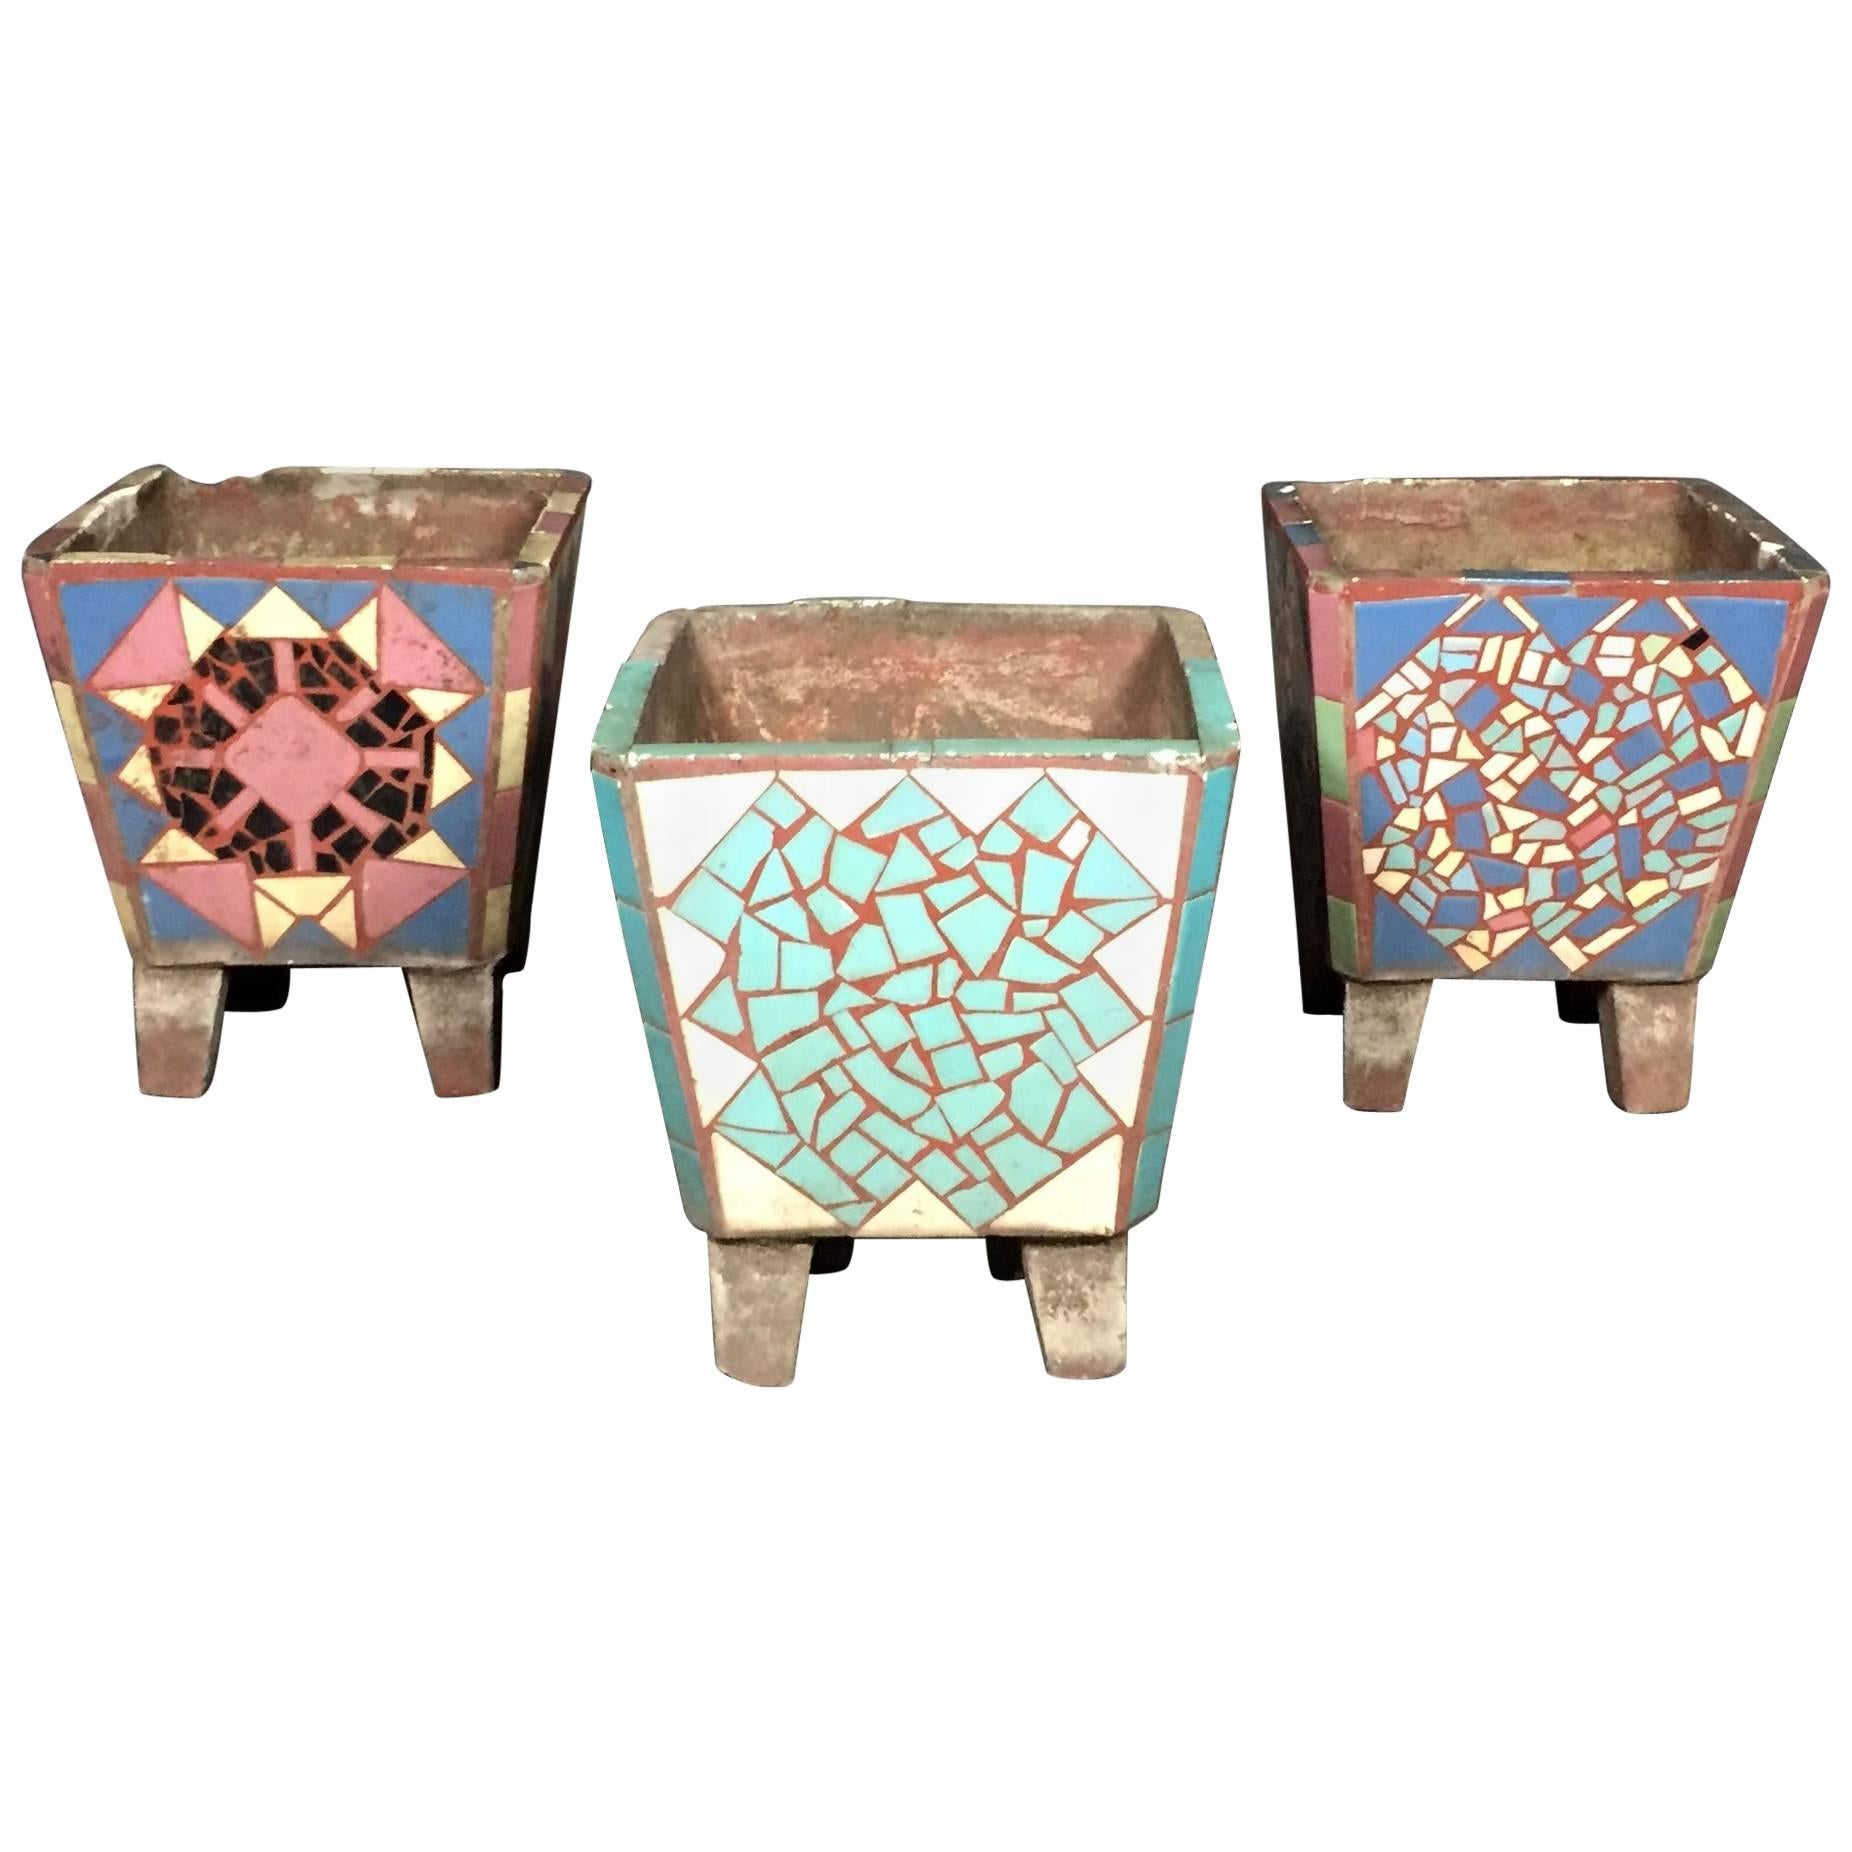 1950s American Cast Stone Tile Inlaid Garden Planters